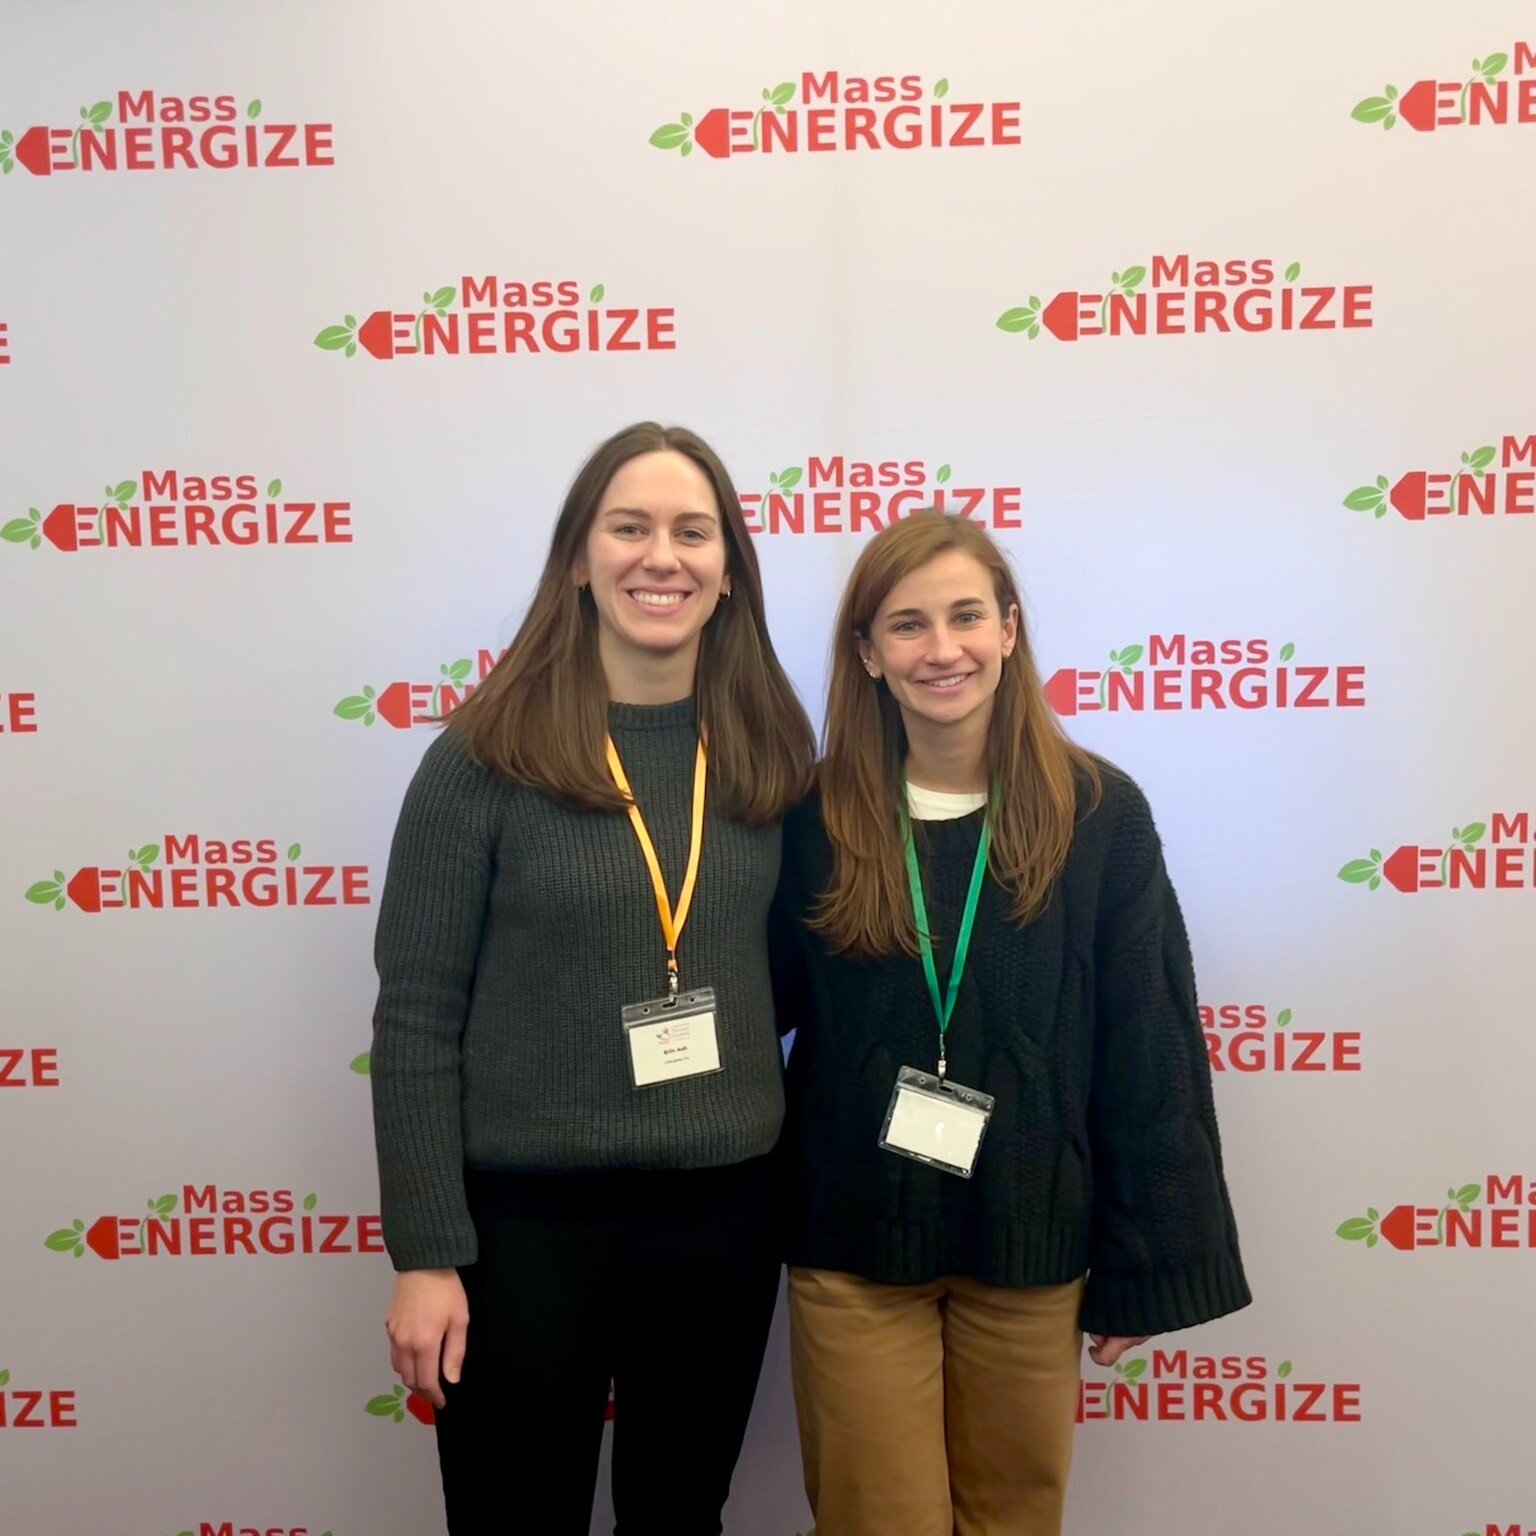 Climable had a great time yesterday at the #MassEnergize Community Climate Leader's Conference! Thank you to all the amazing speakers and panelists for sharing your knowledge and perspectives, and to the MassEnergize and @brandeisuniversity staff for